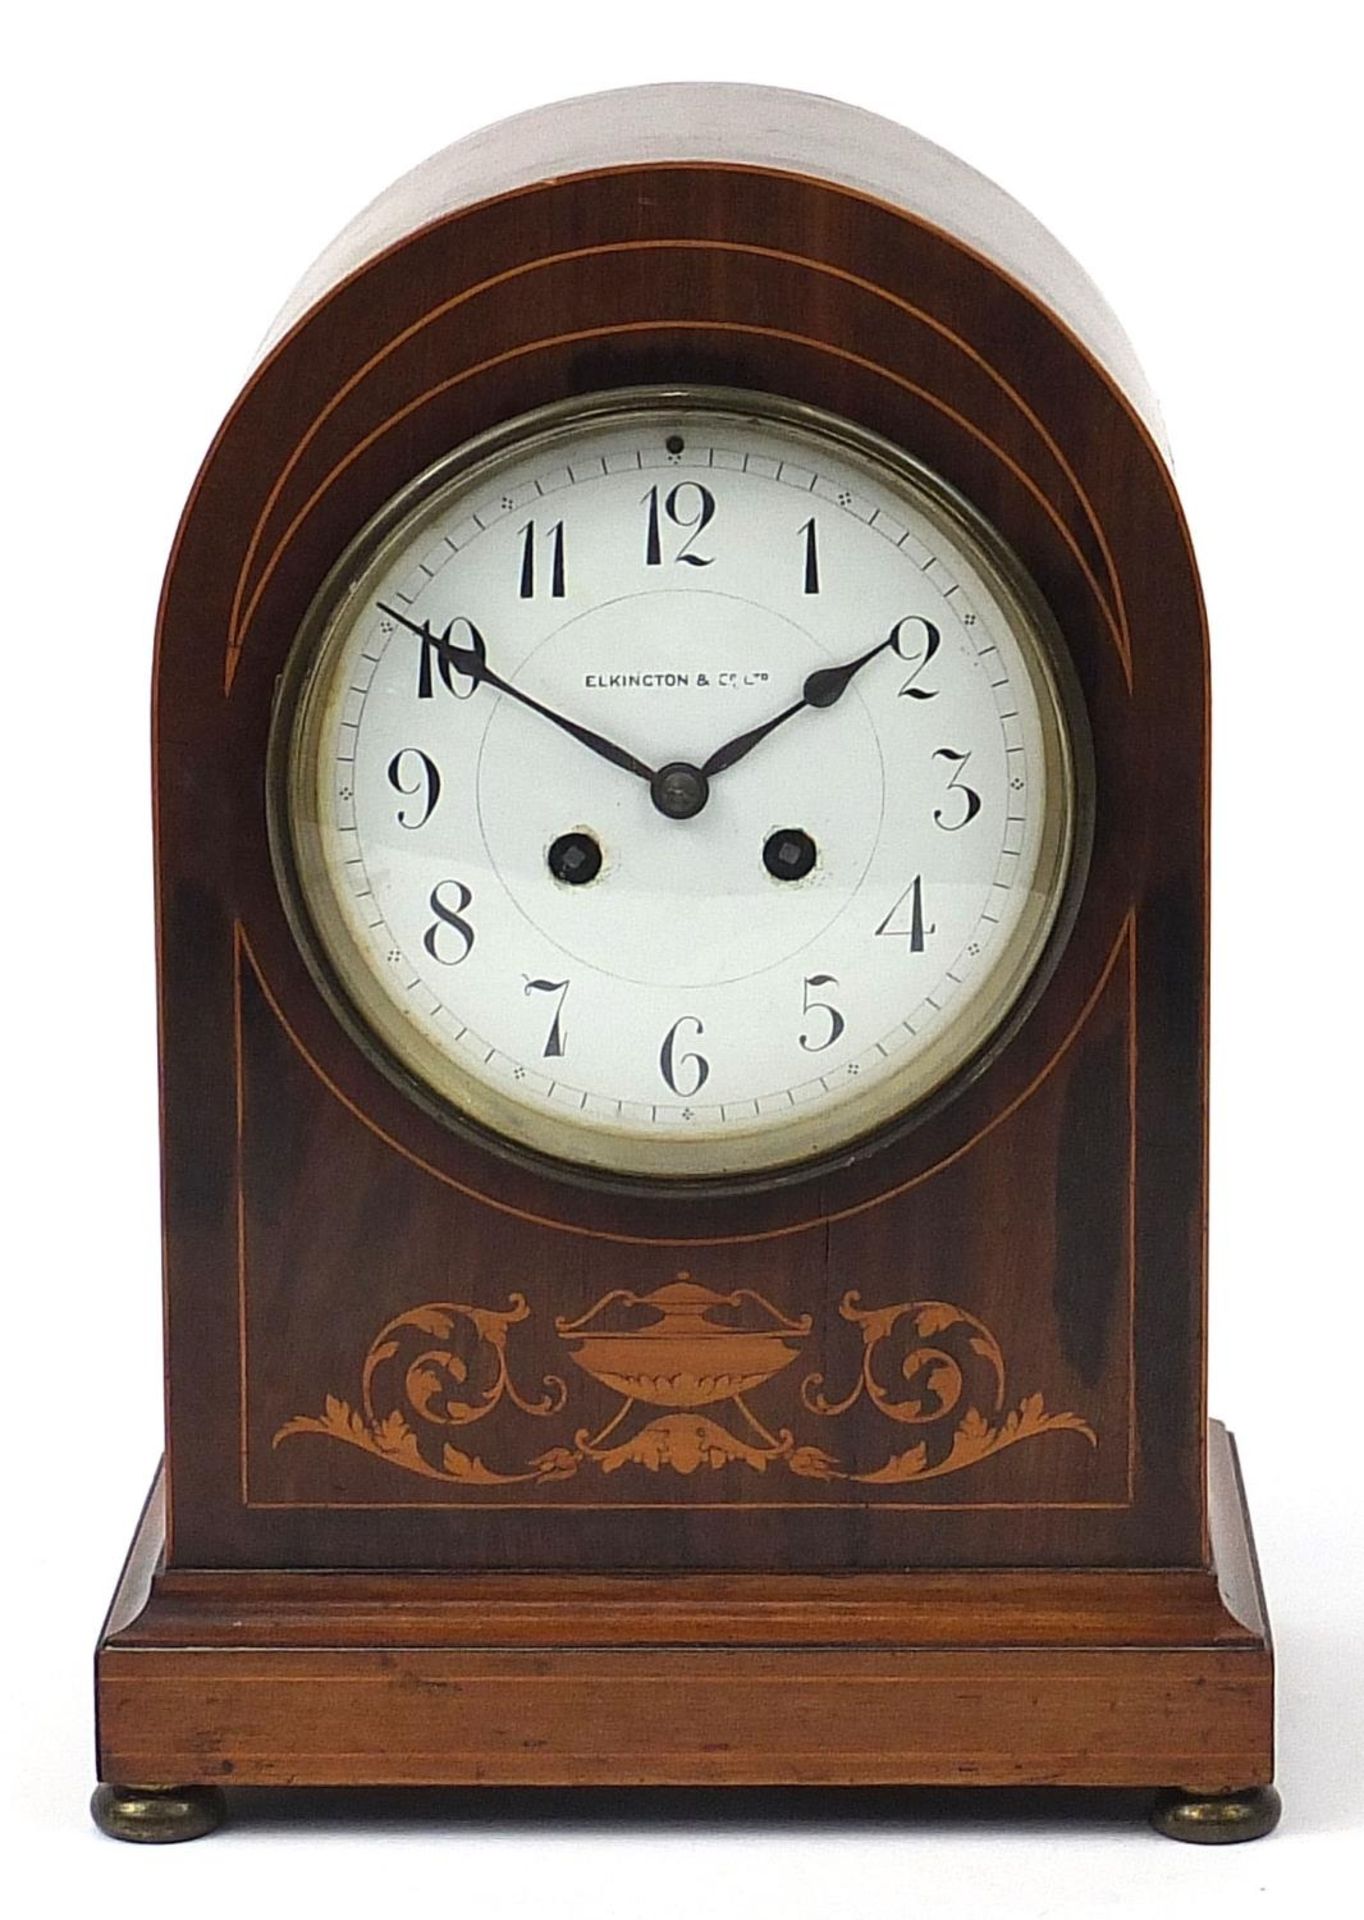 Elkington & Co, Edwardian inlaid mahogany dome top mantle clock striking on a gong with enamel - Image 2 of 10